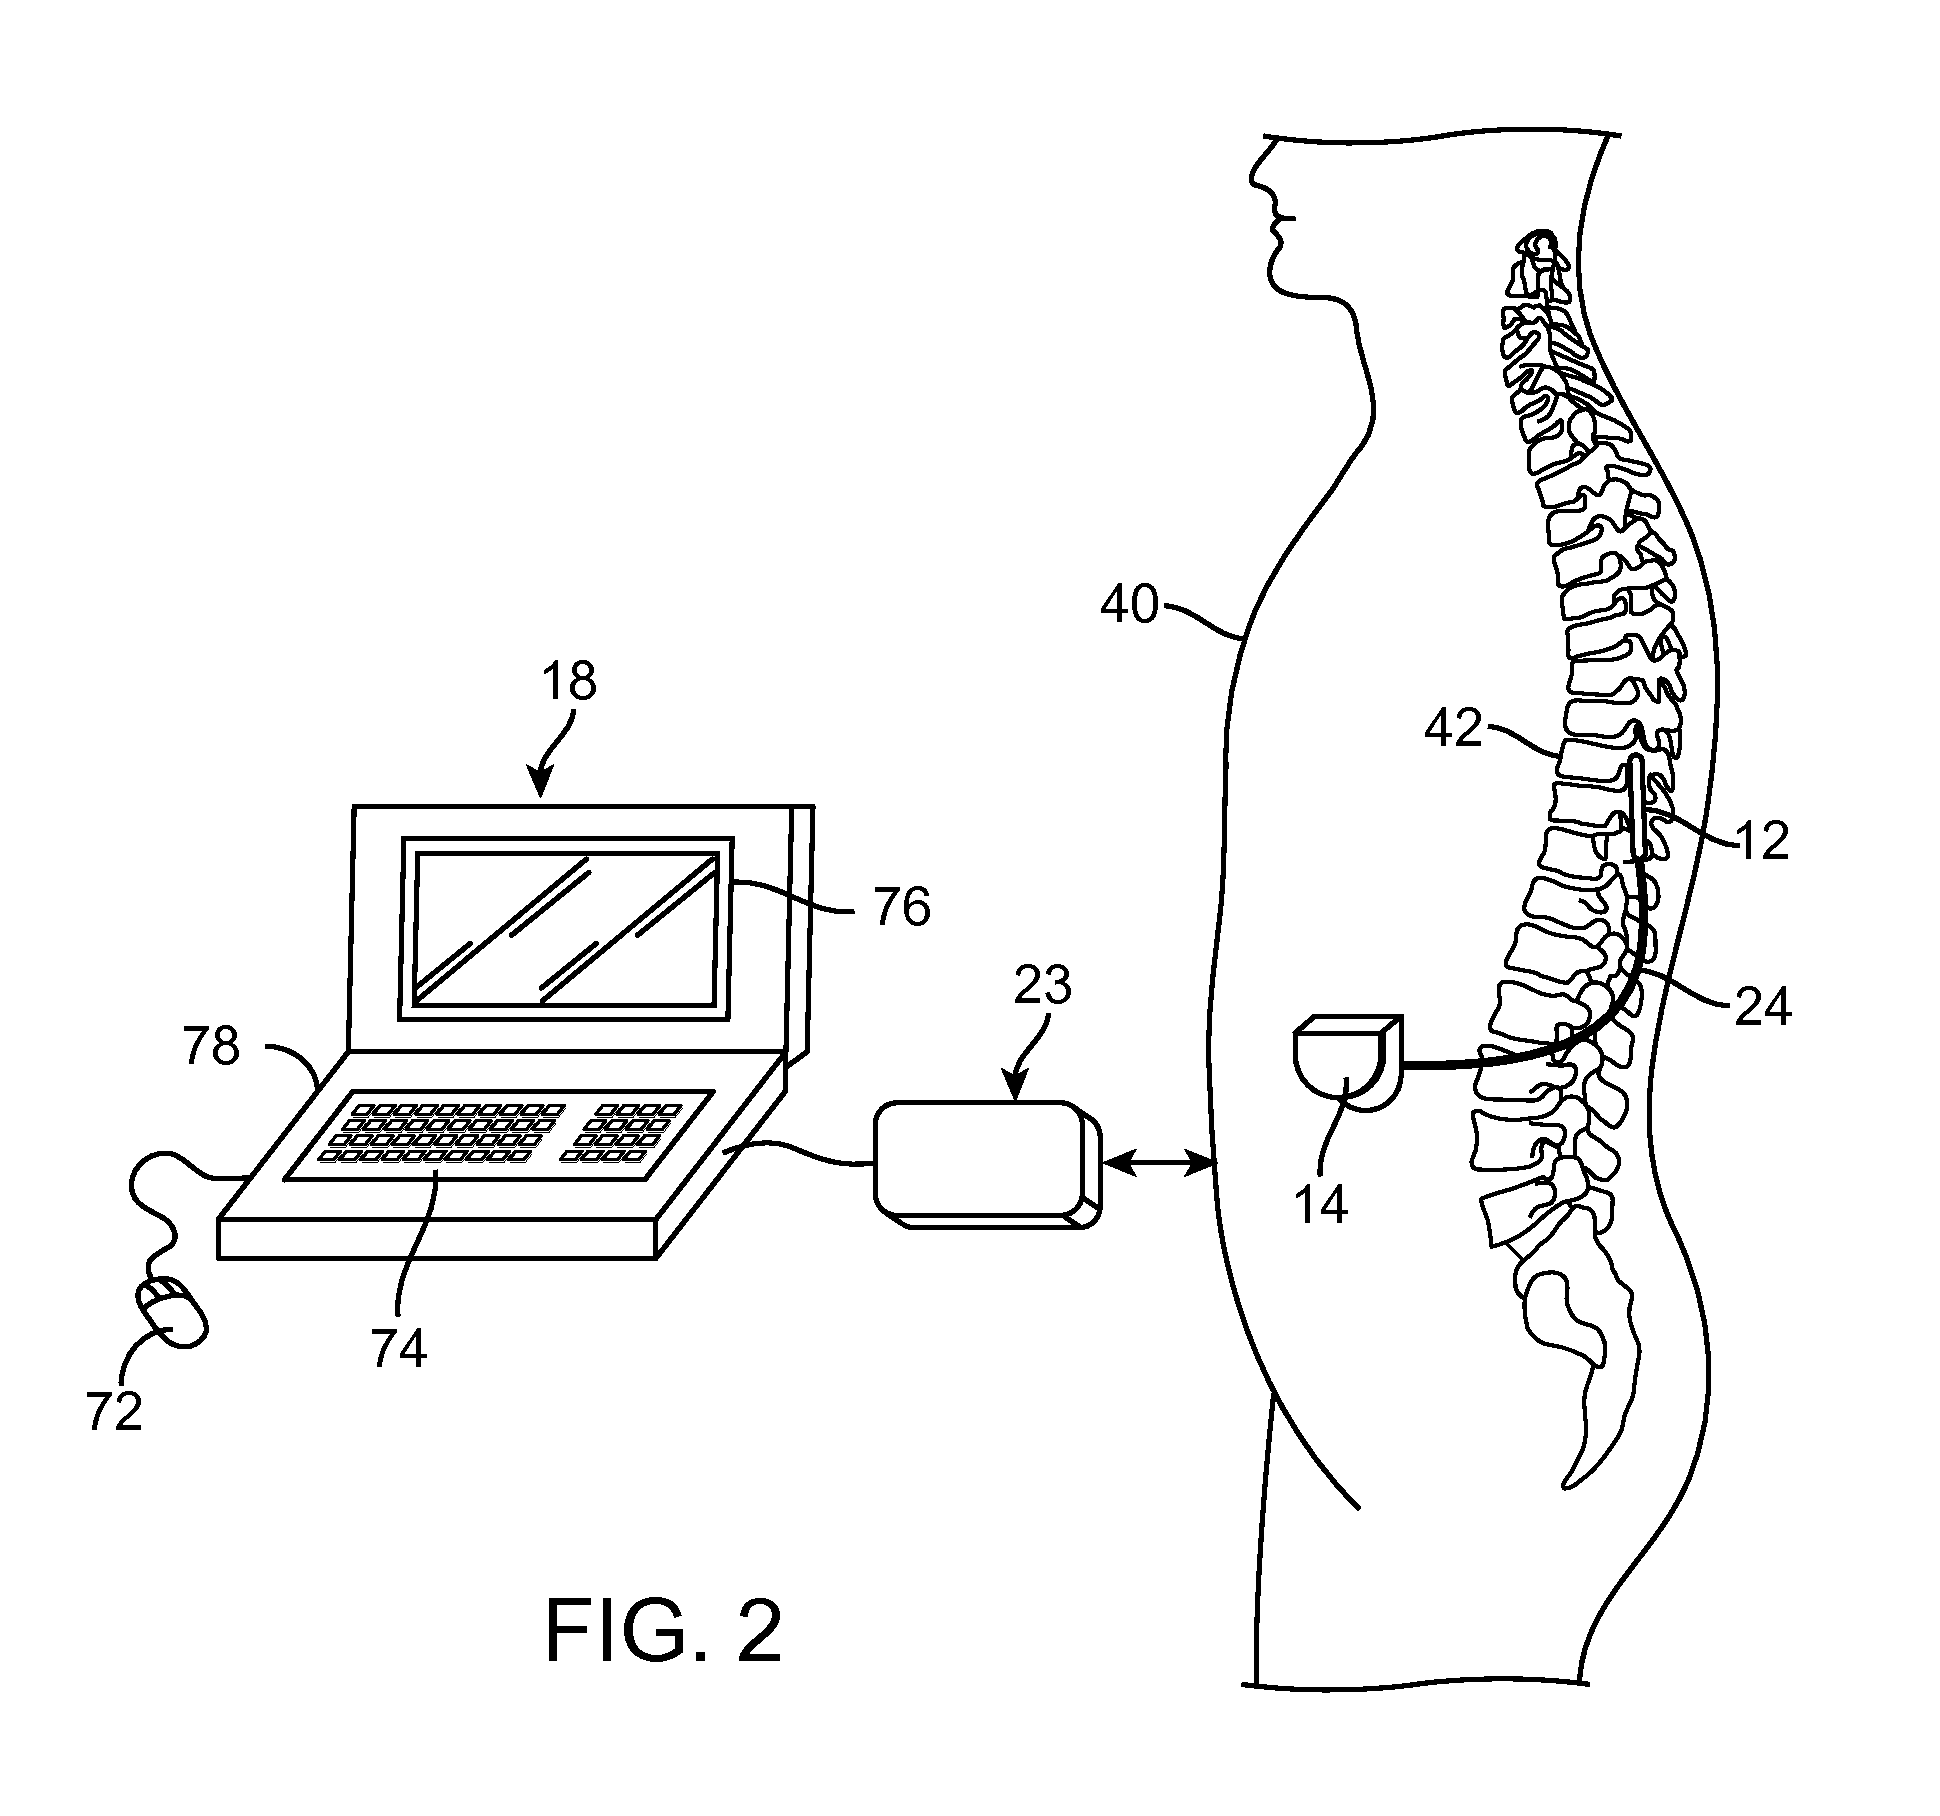 System and method for programming neurostimulation devices using cached plug-in software drivers